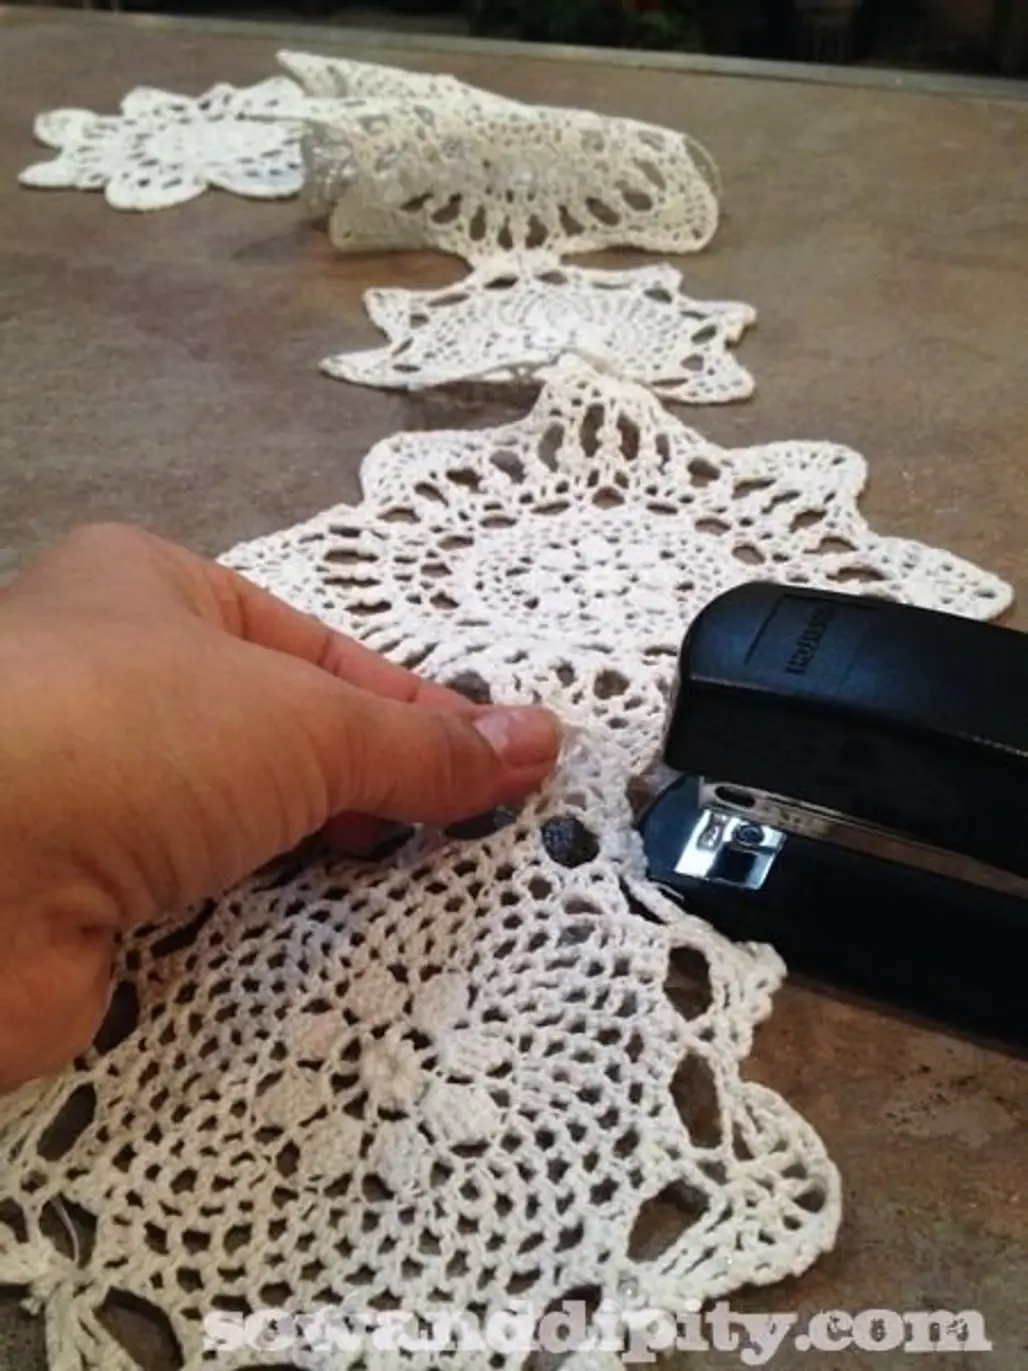 Staple Small Doilies Together to Make a Lacy Garland